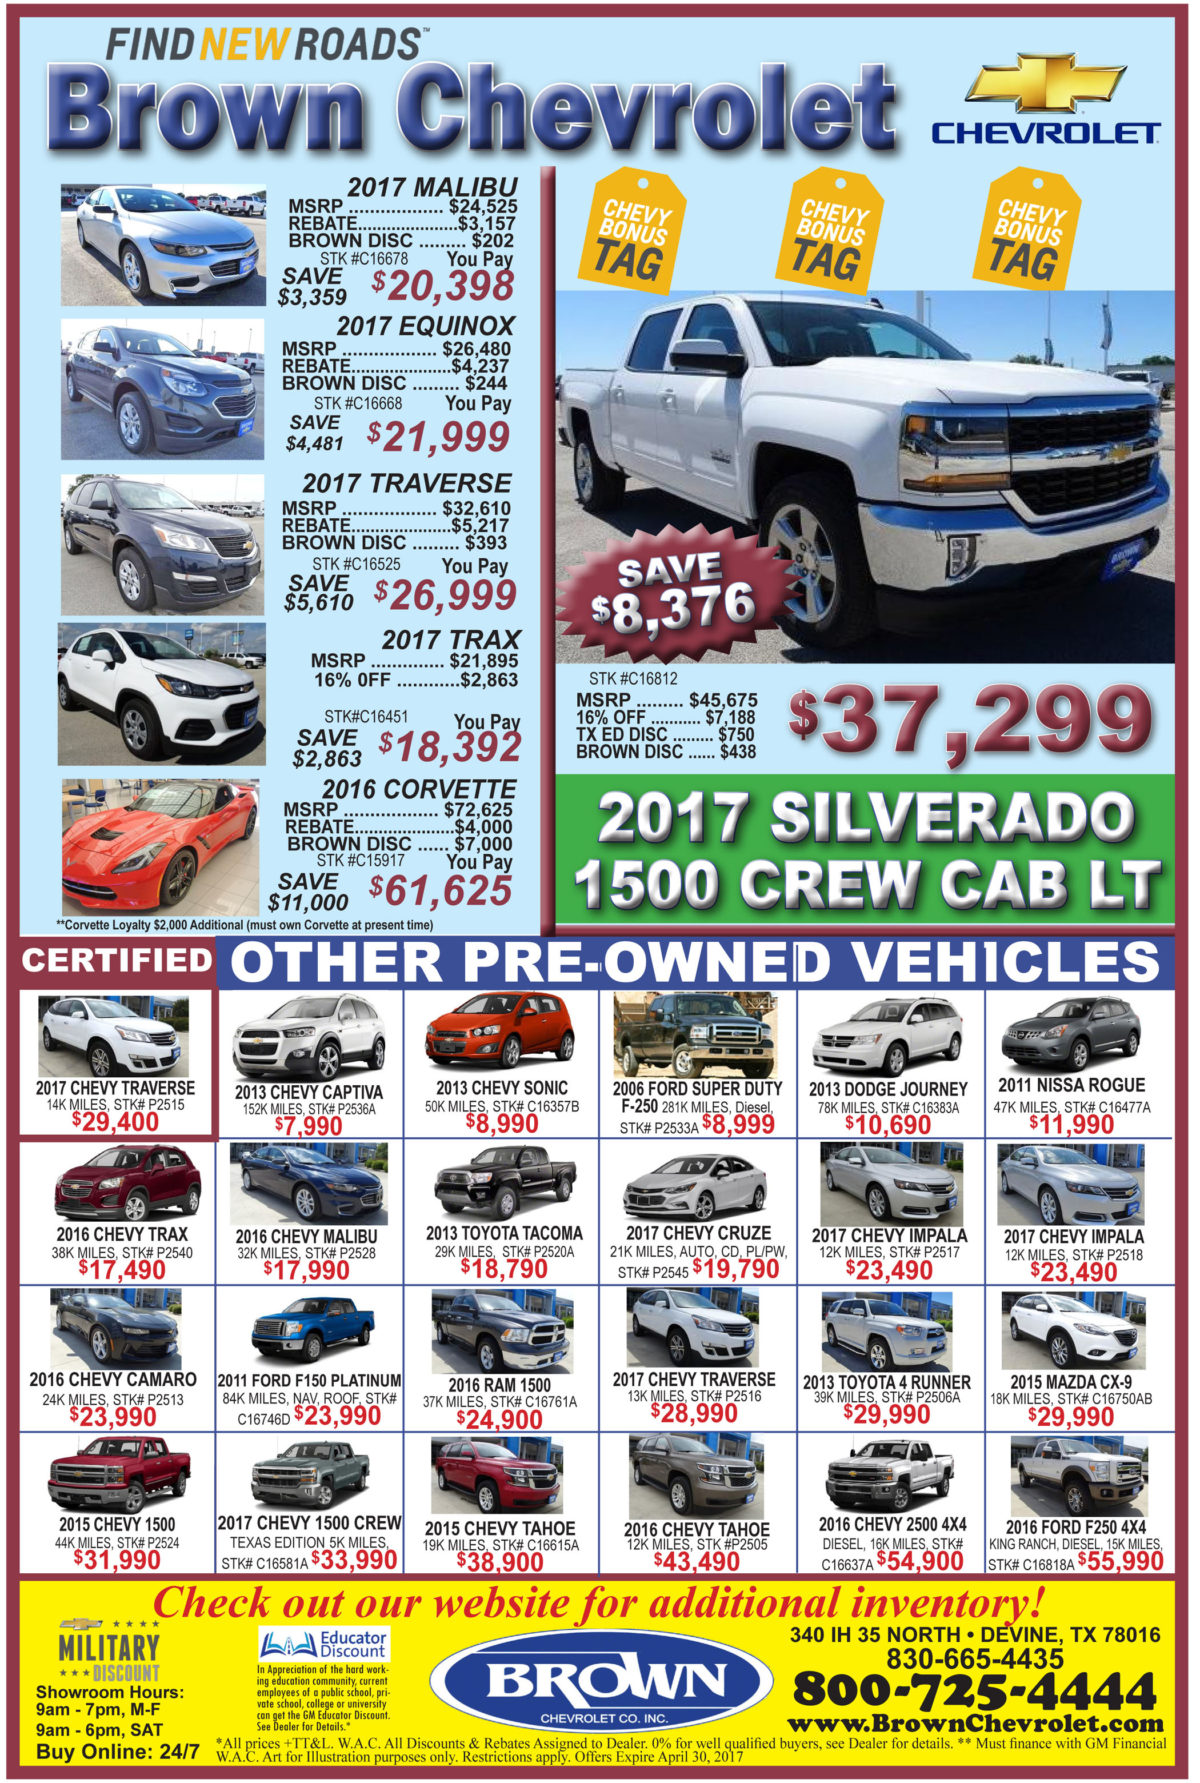 Brown Chevrolet deals for the week of 4-26-17